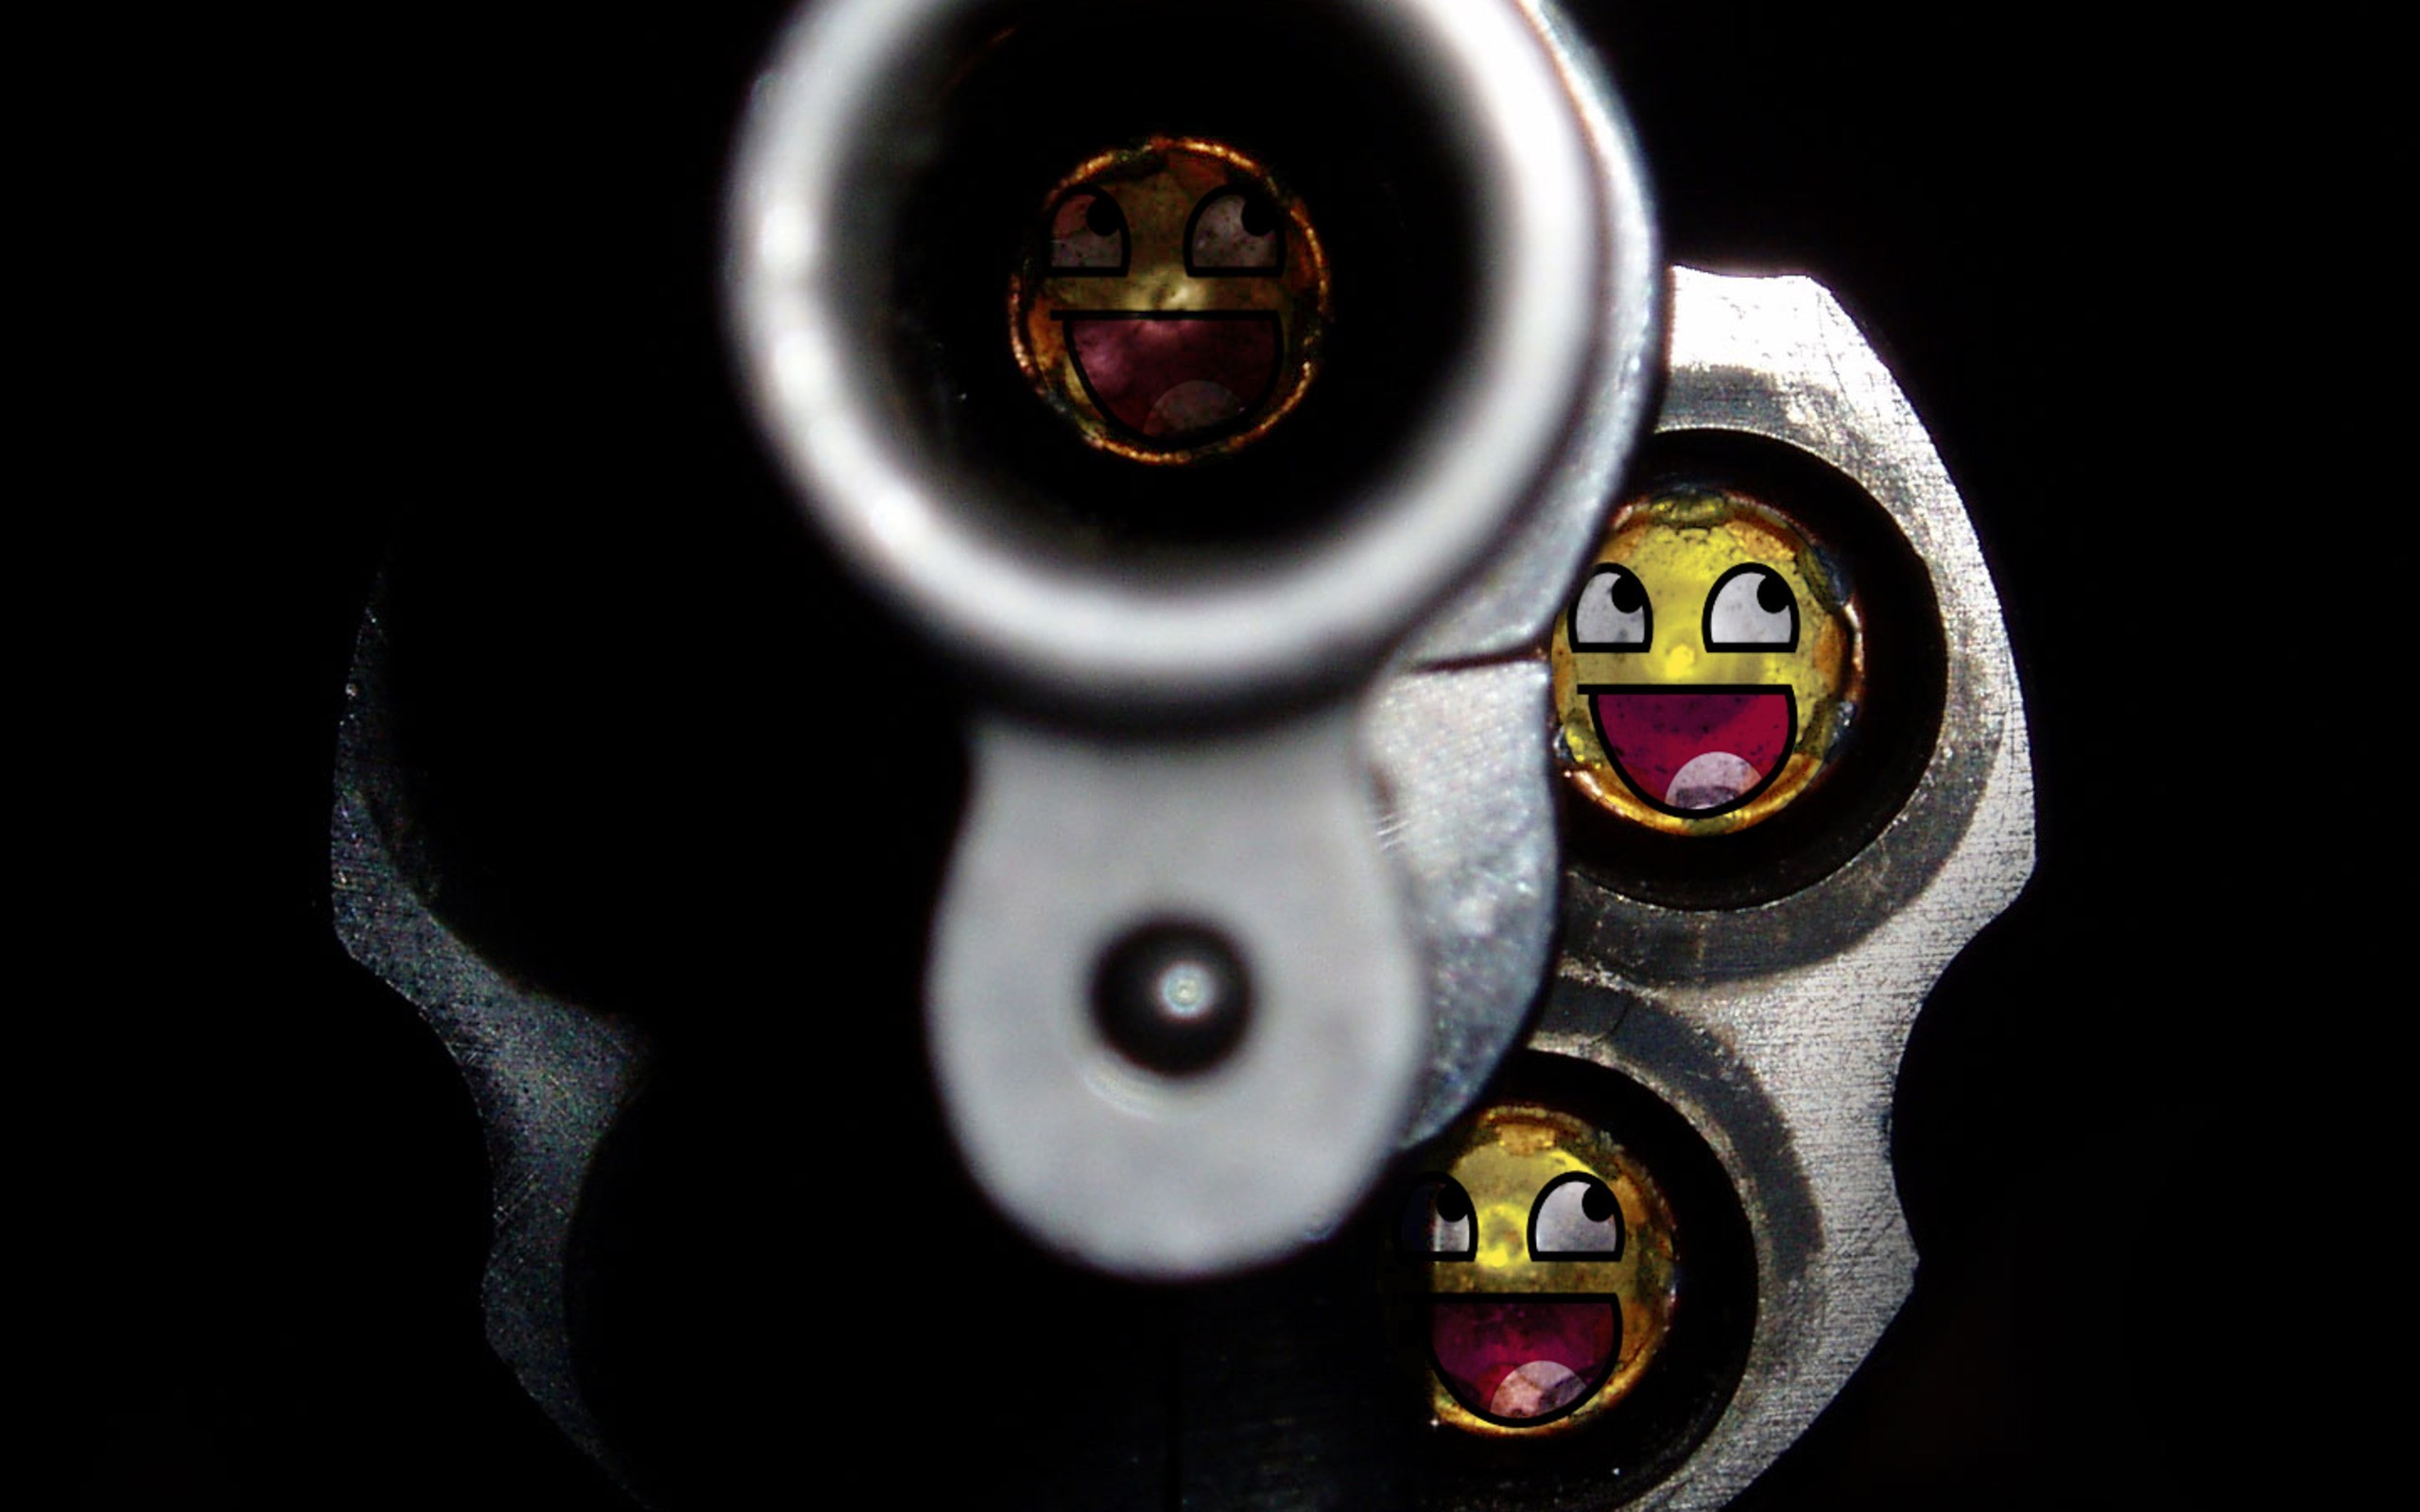 General 2560x1600 awesome face Emoji gun at gunpoint closeup black background simple background weapon revolver memes